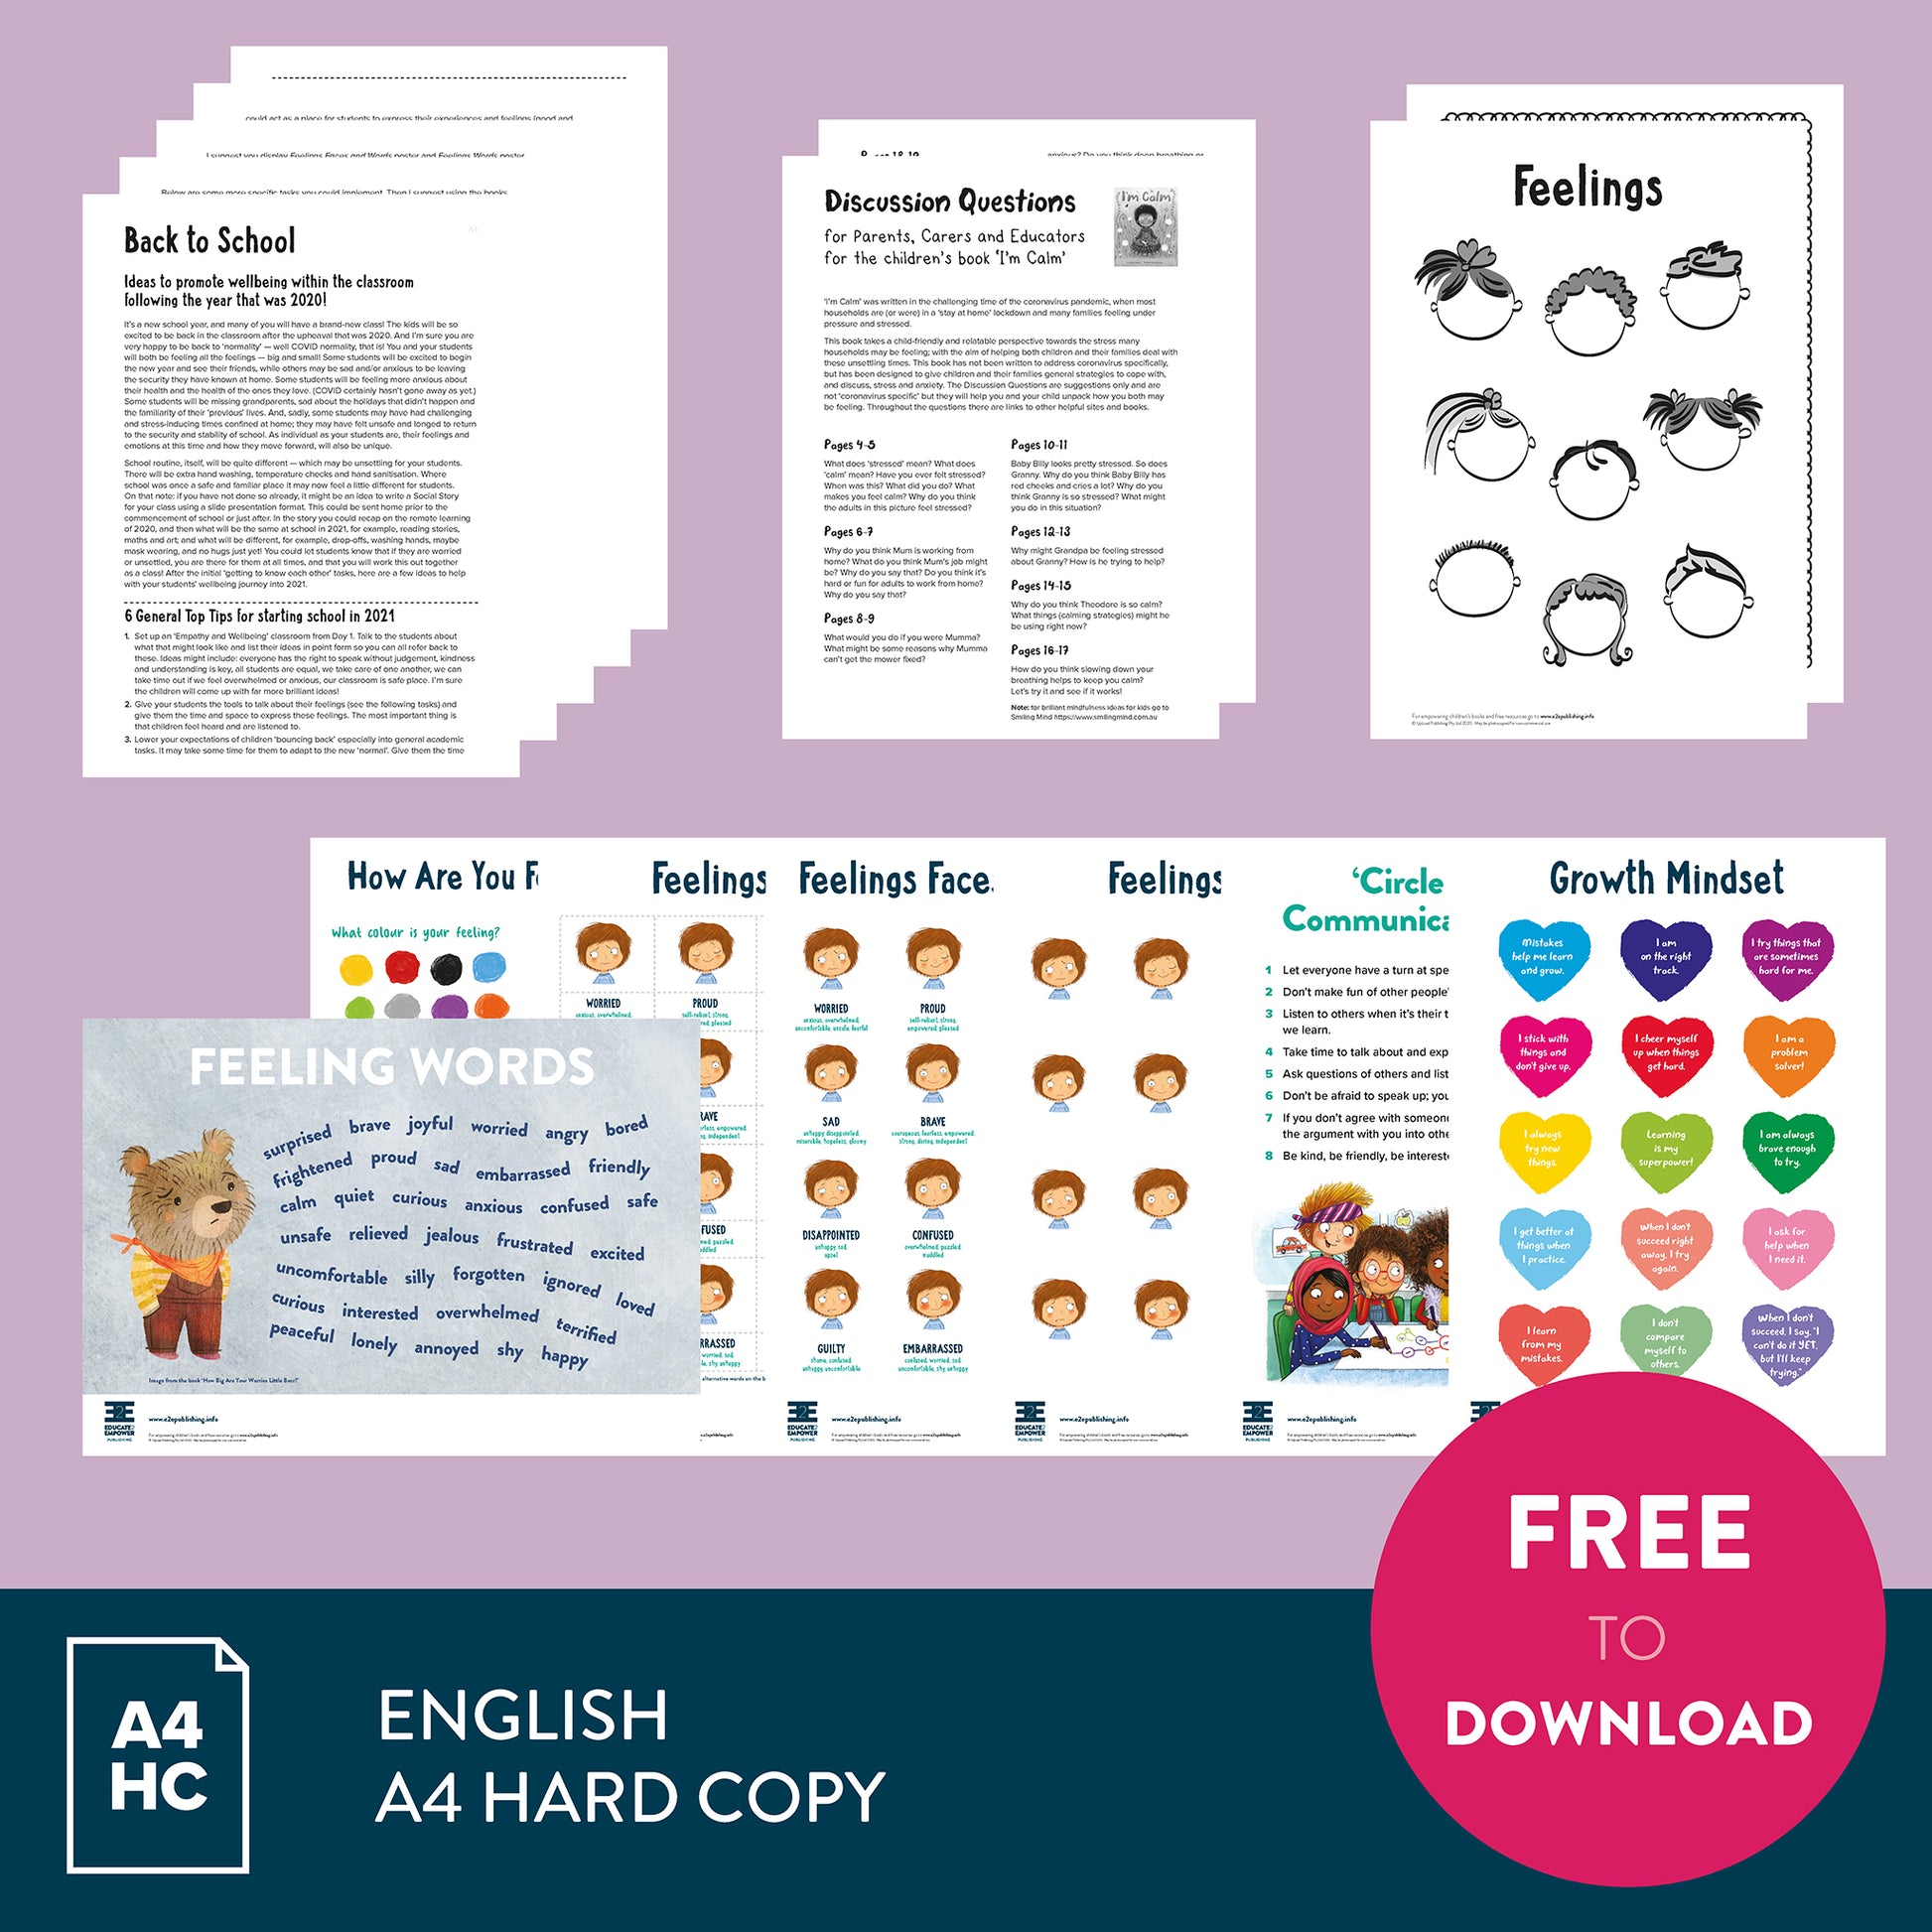 A promotional image showing a collage of activity sheets, lesson plans and posters available in the 'Back to School Bundle'